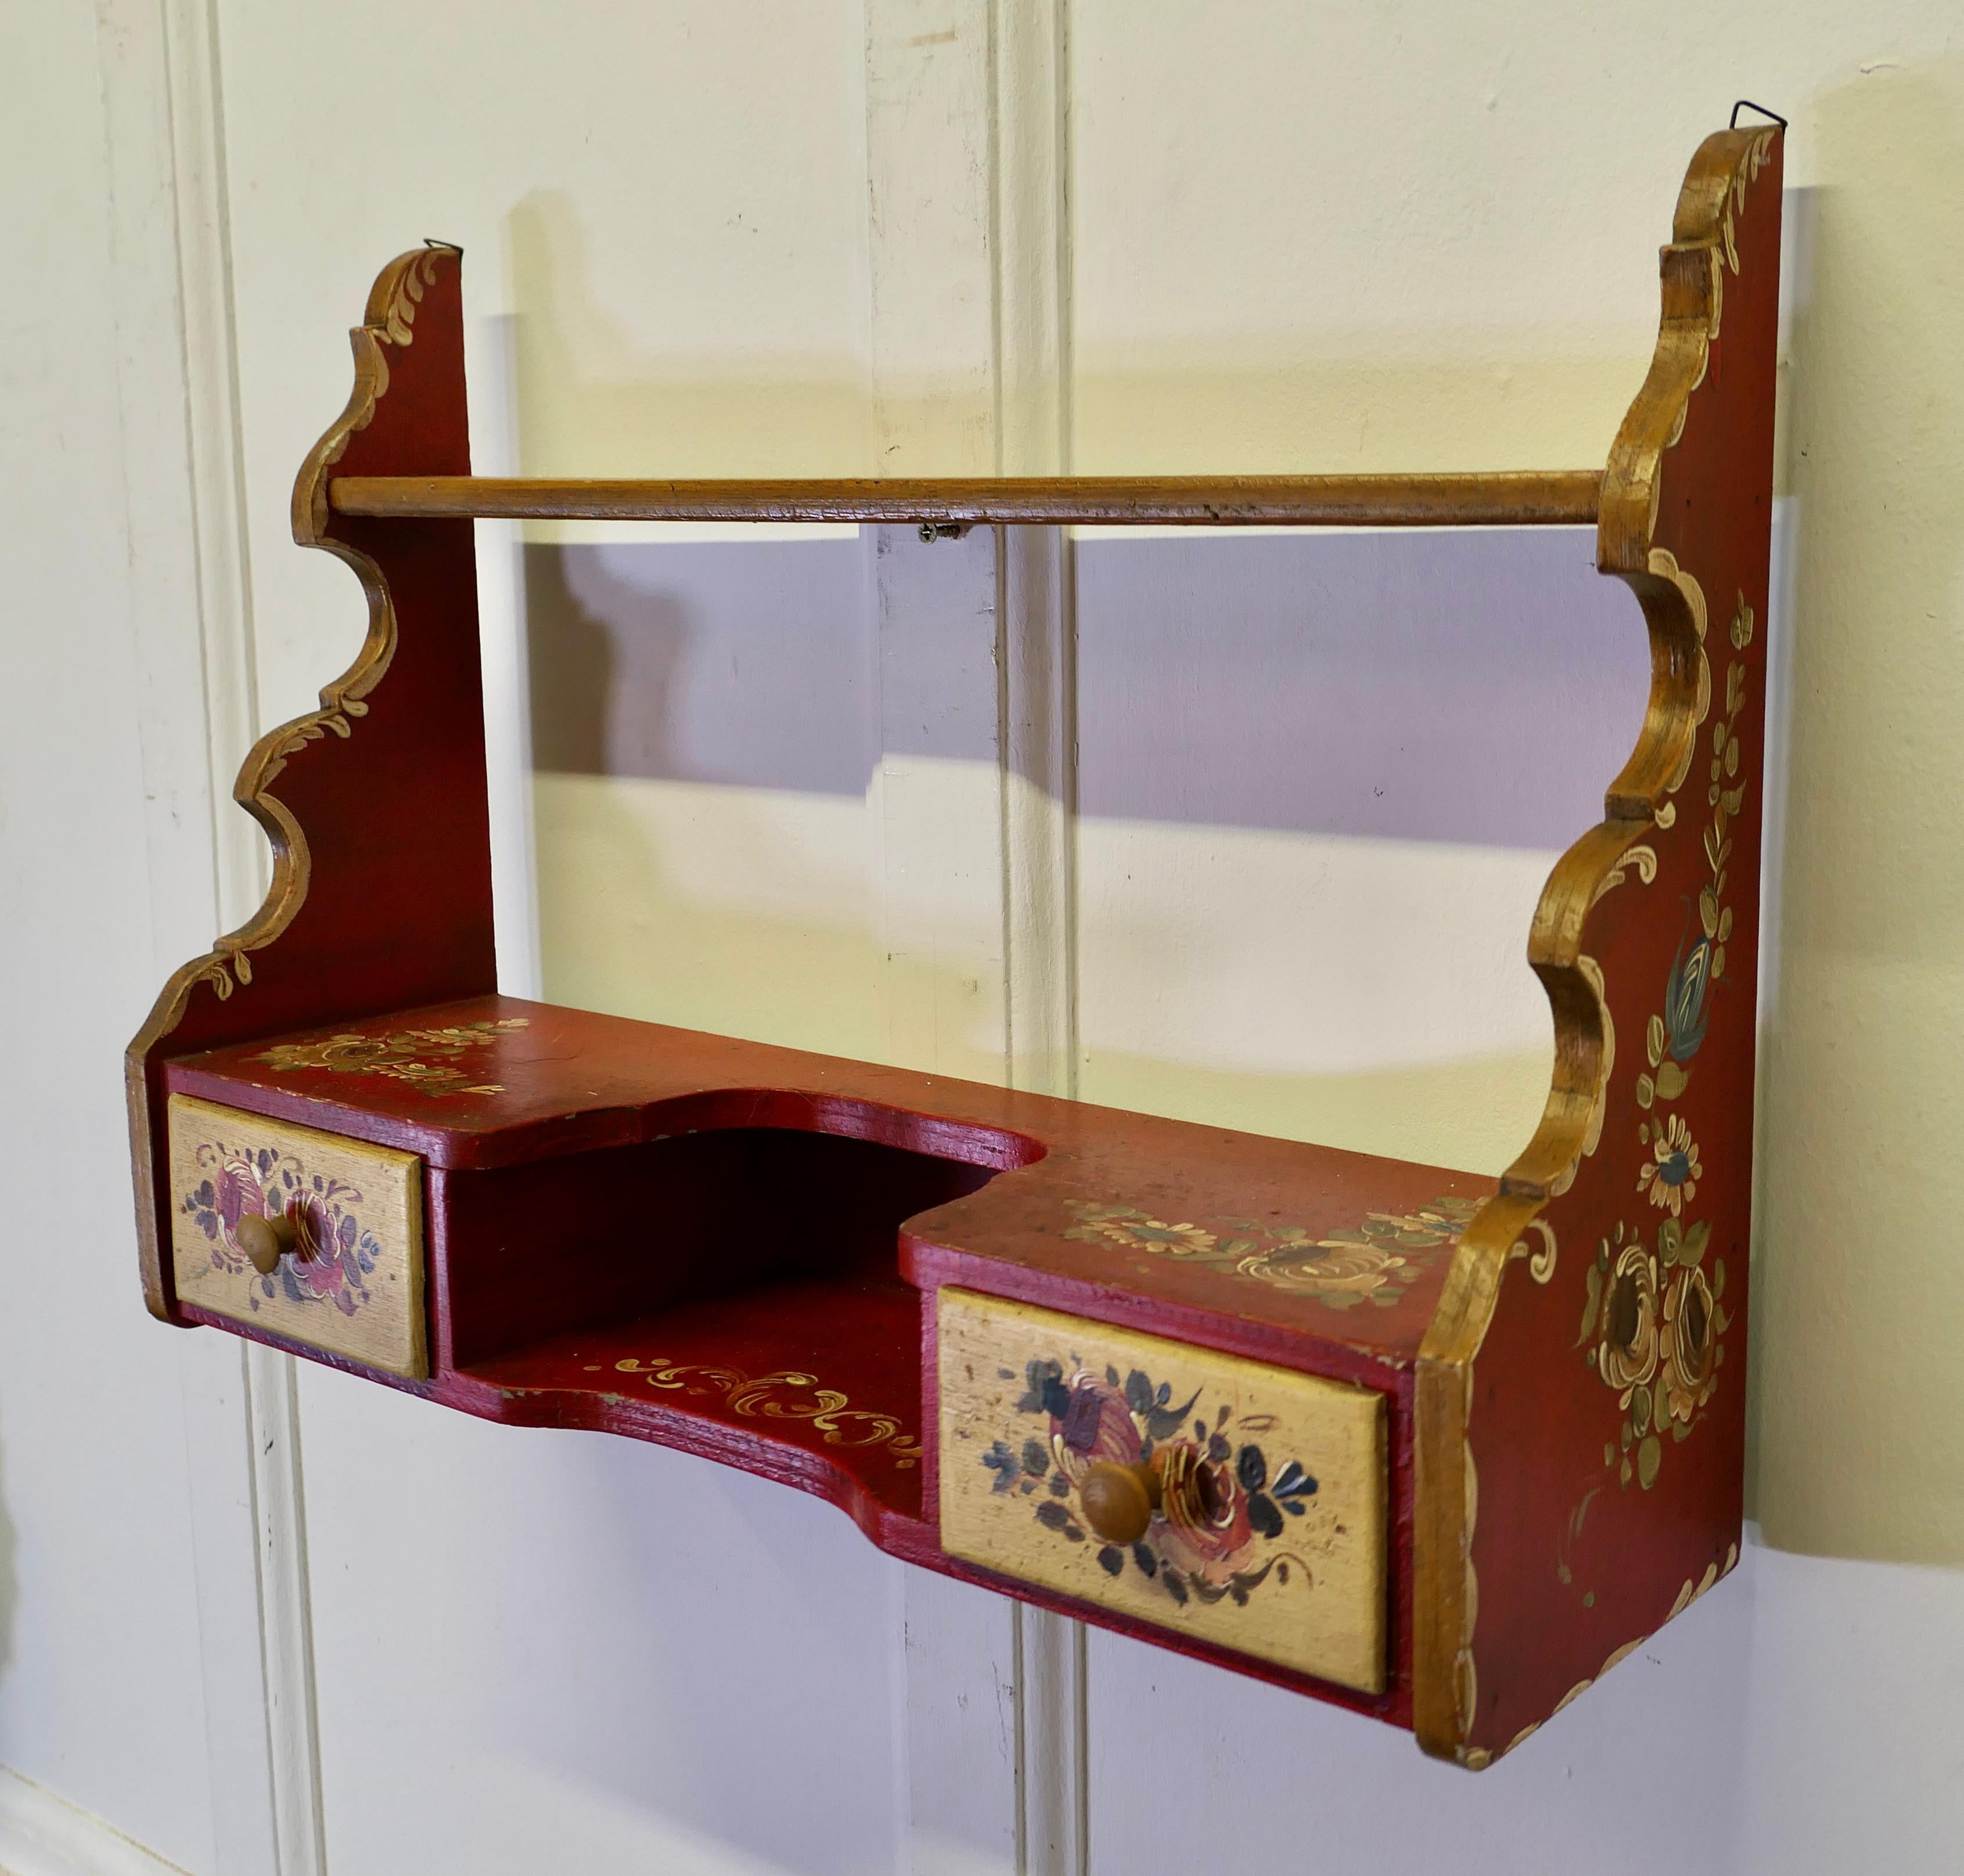 19th Century Rustic Painted Folk Art Wall Shelf with Drawers